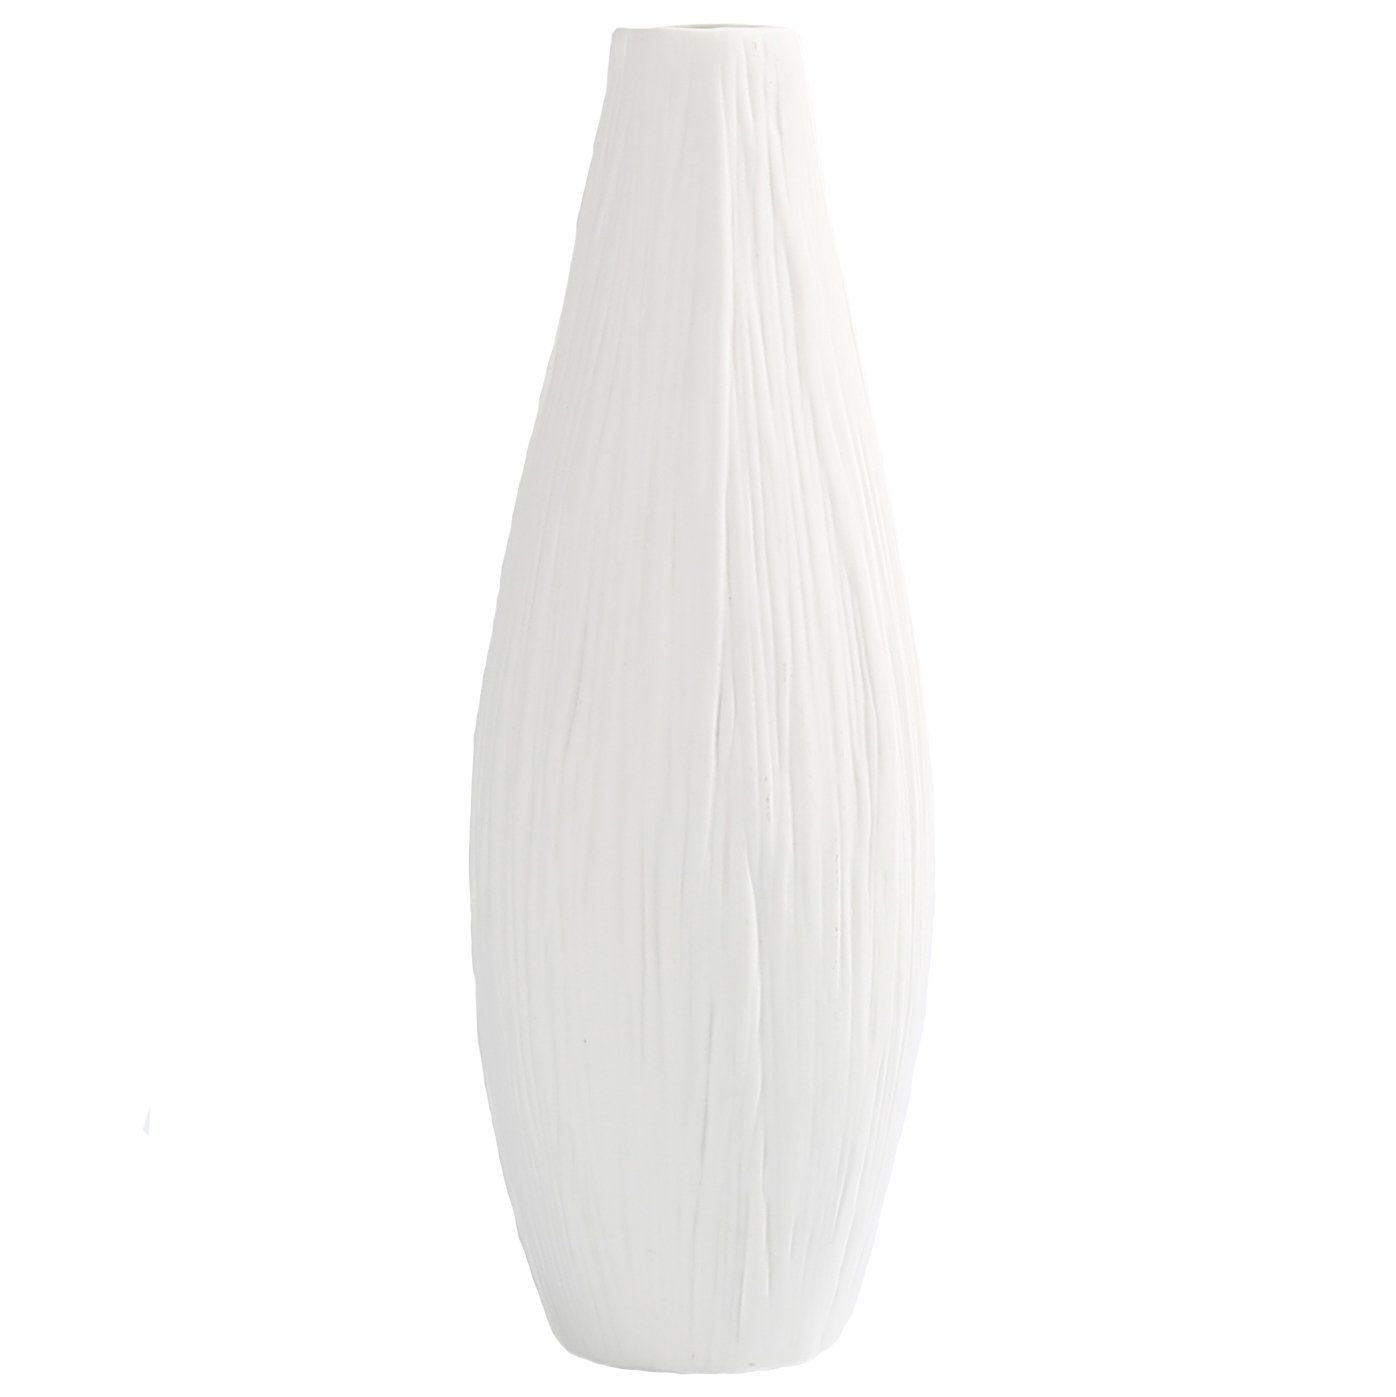 24 attractive Mccoy Pottery Green Vase 2024 free download mccoy pottery green vase of tall black vases collection d vine dev 10 pure white ceramic flower within d vine dev 10 pure white ceramic flower vase tall oval